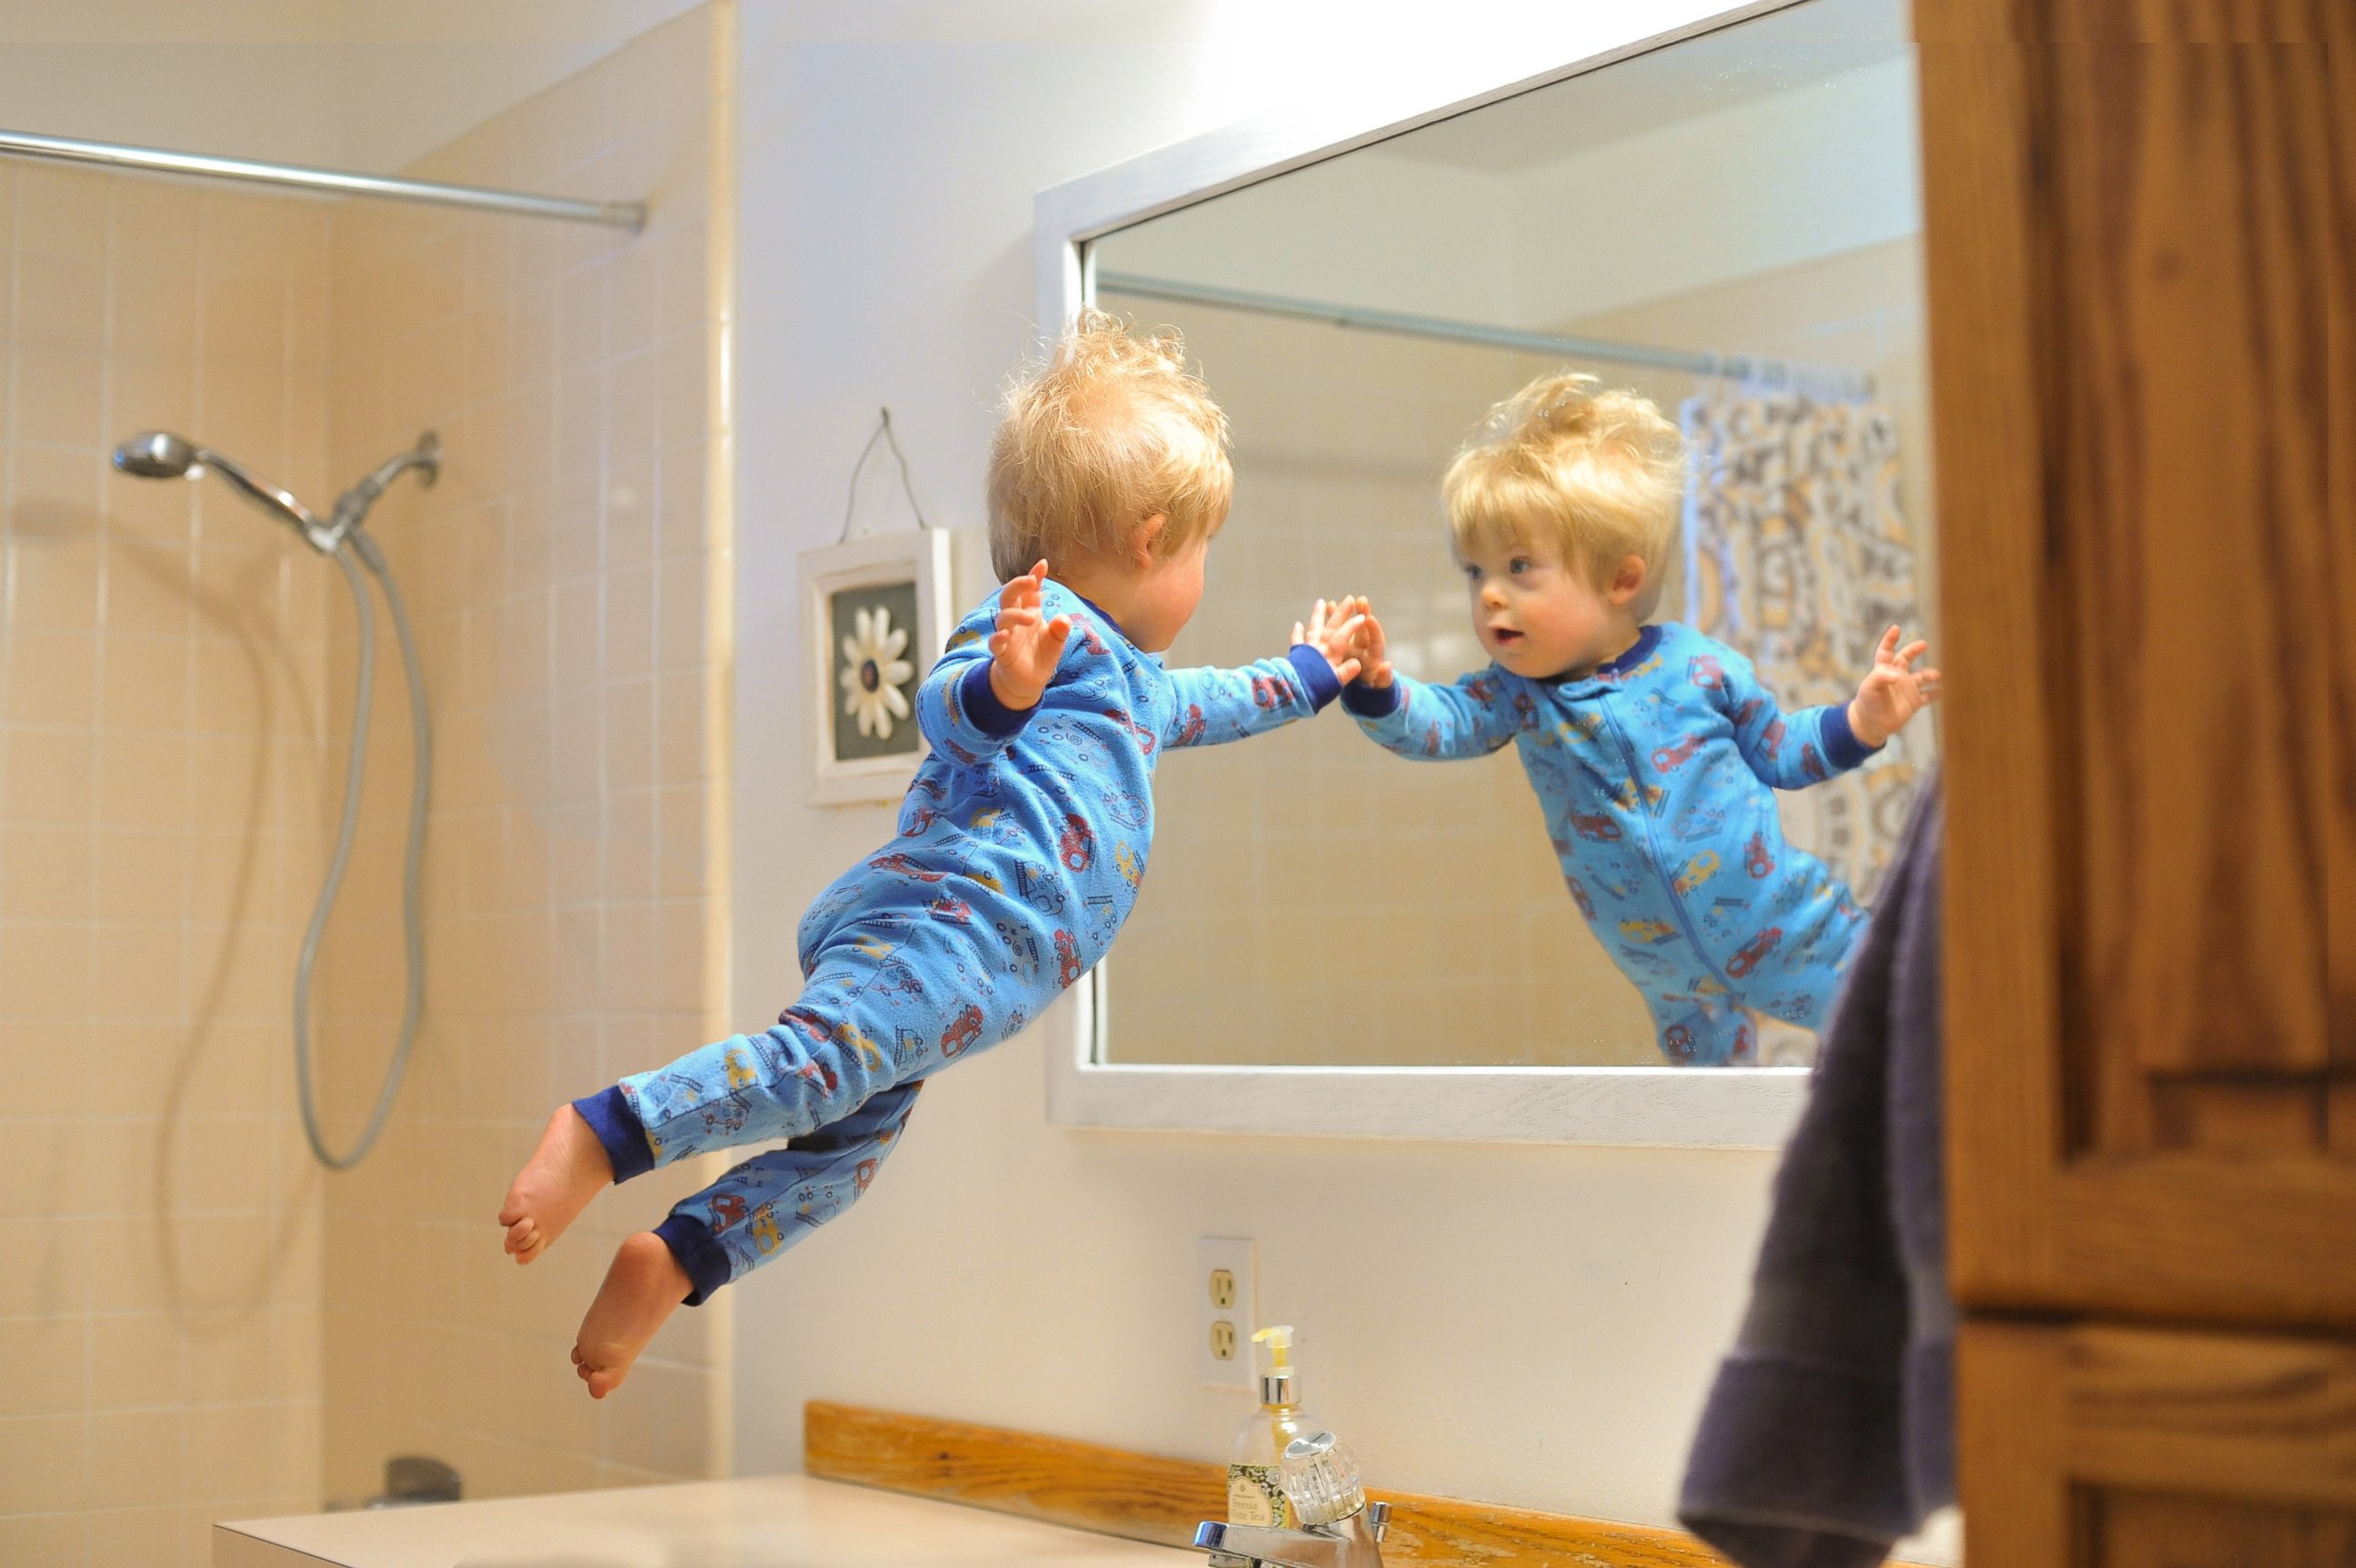 PHOTO: Wil checks himself out in the mirror first thing in the morning.